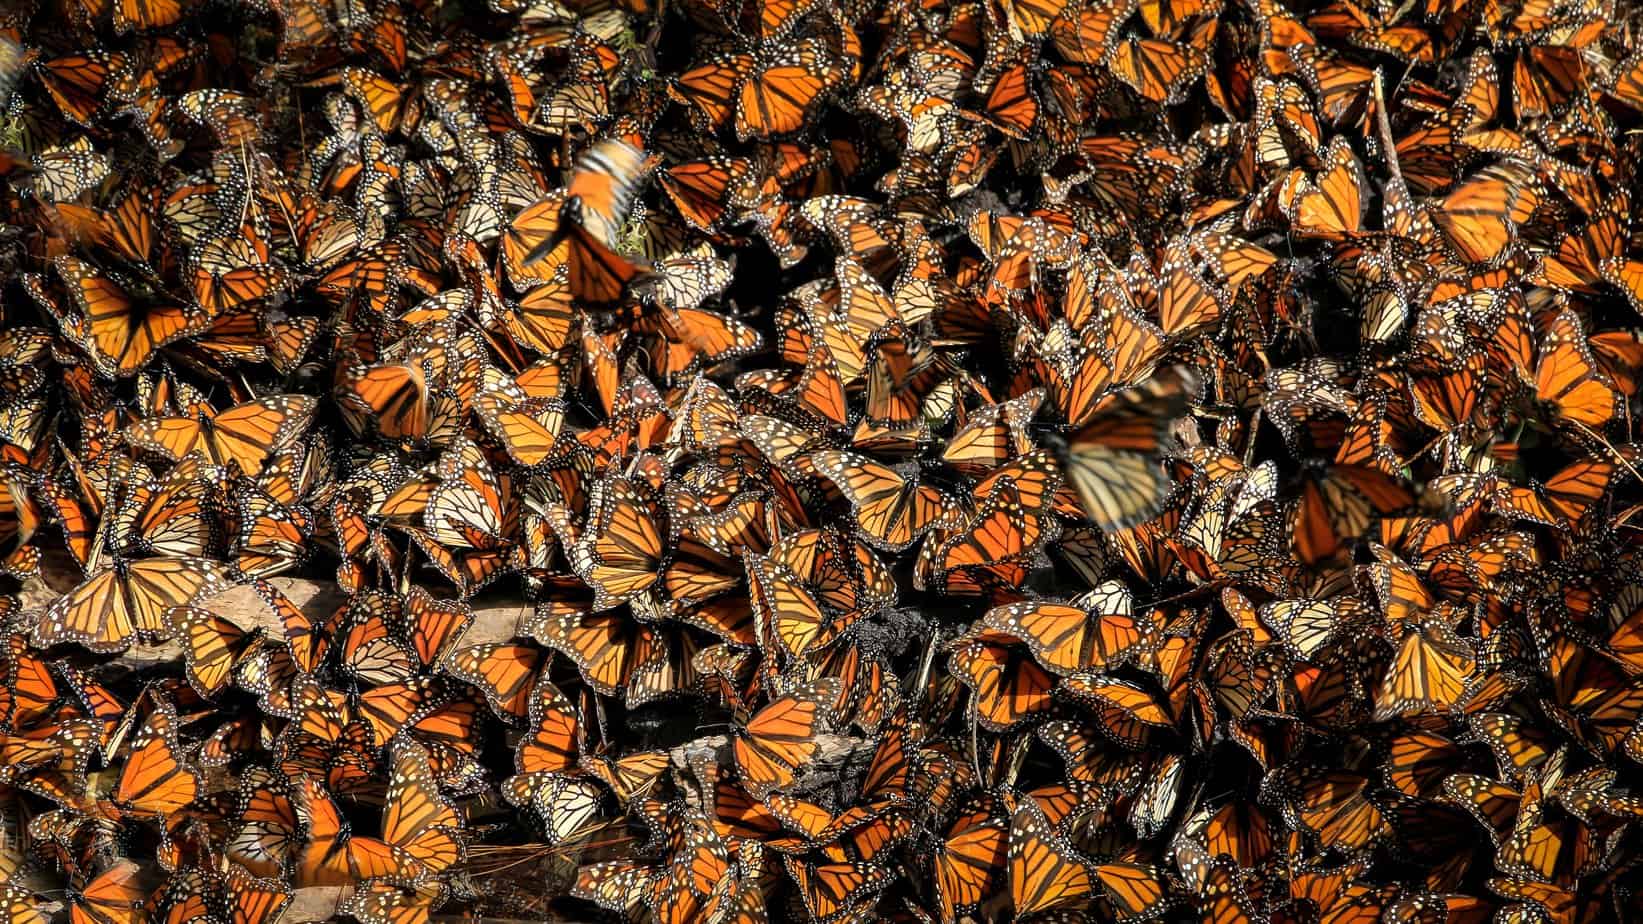 Monarch Migration: Track Butterflies on their Journey